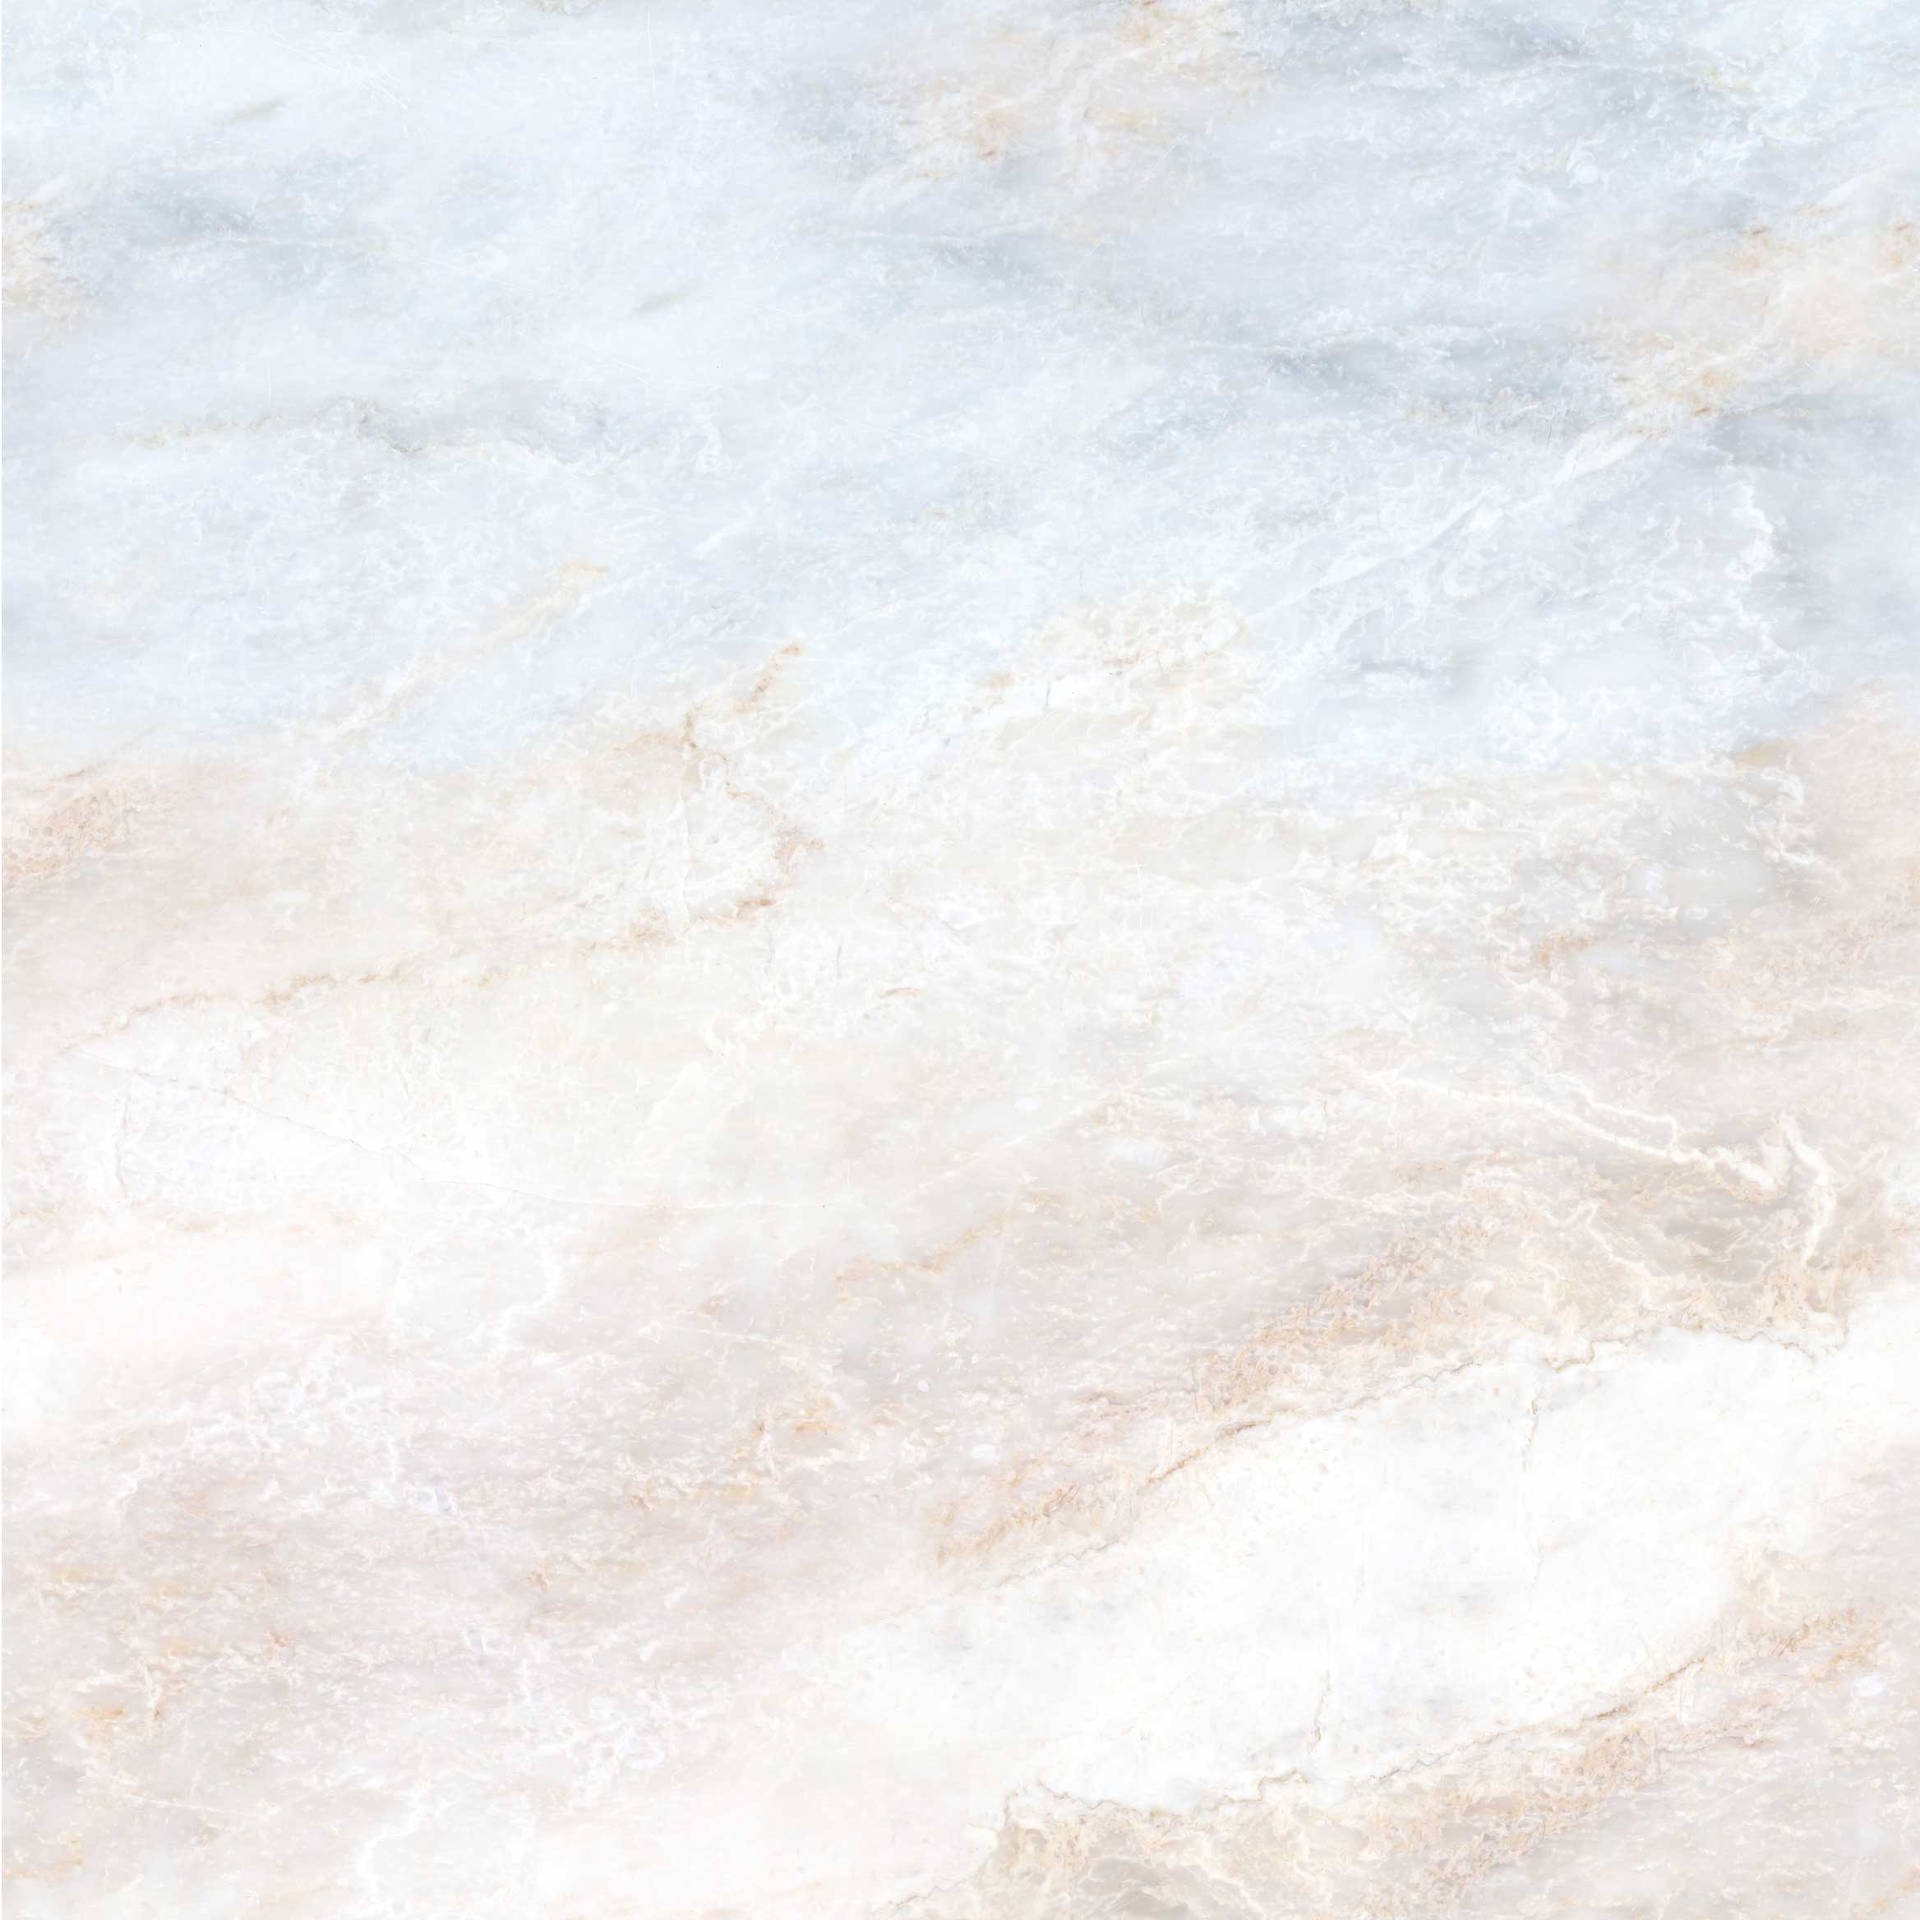 Smooth and Sleek Marble, a timeless addition to any home décor. Wallpaper